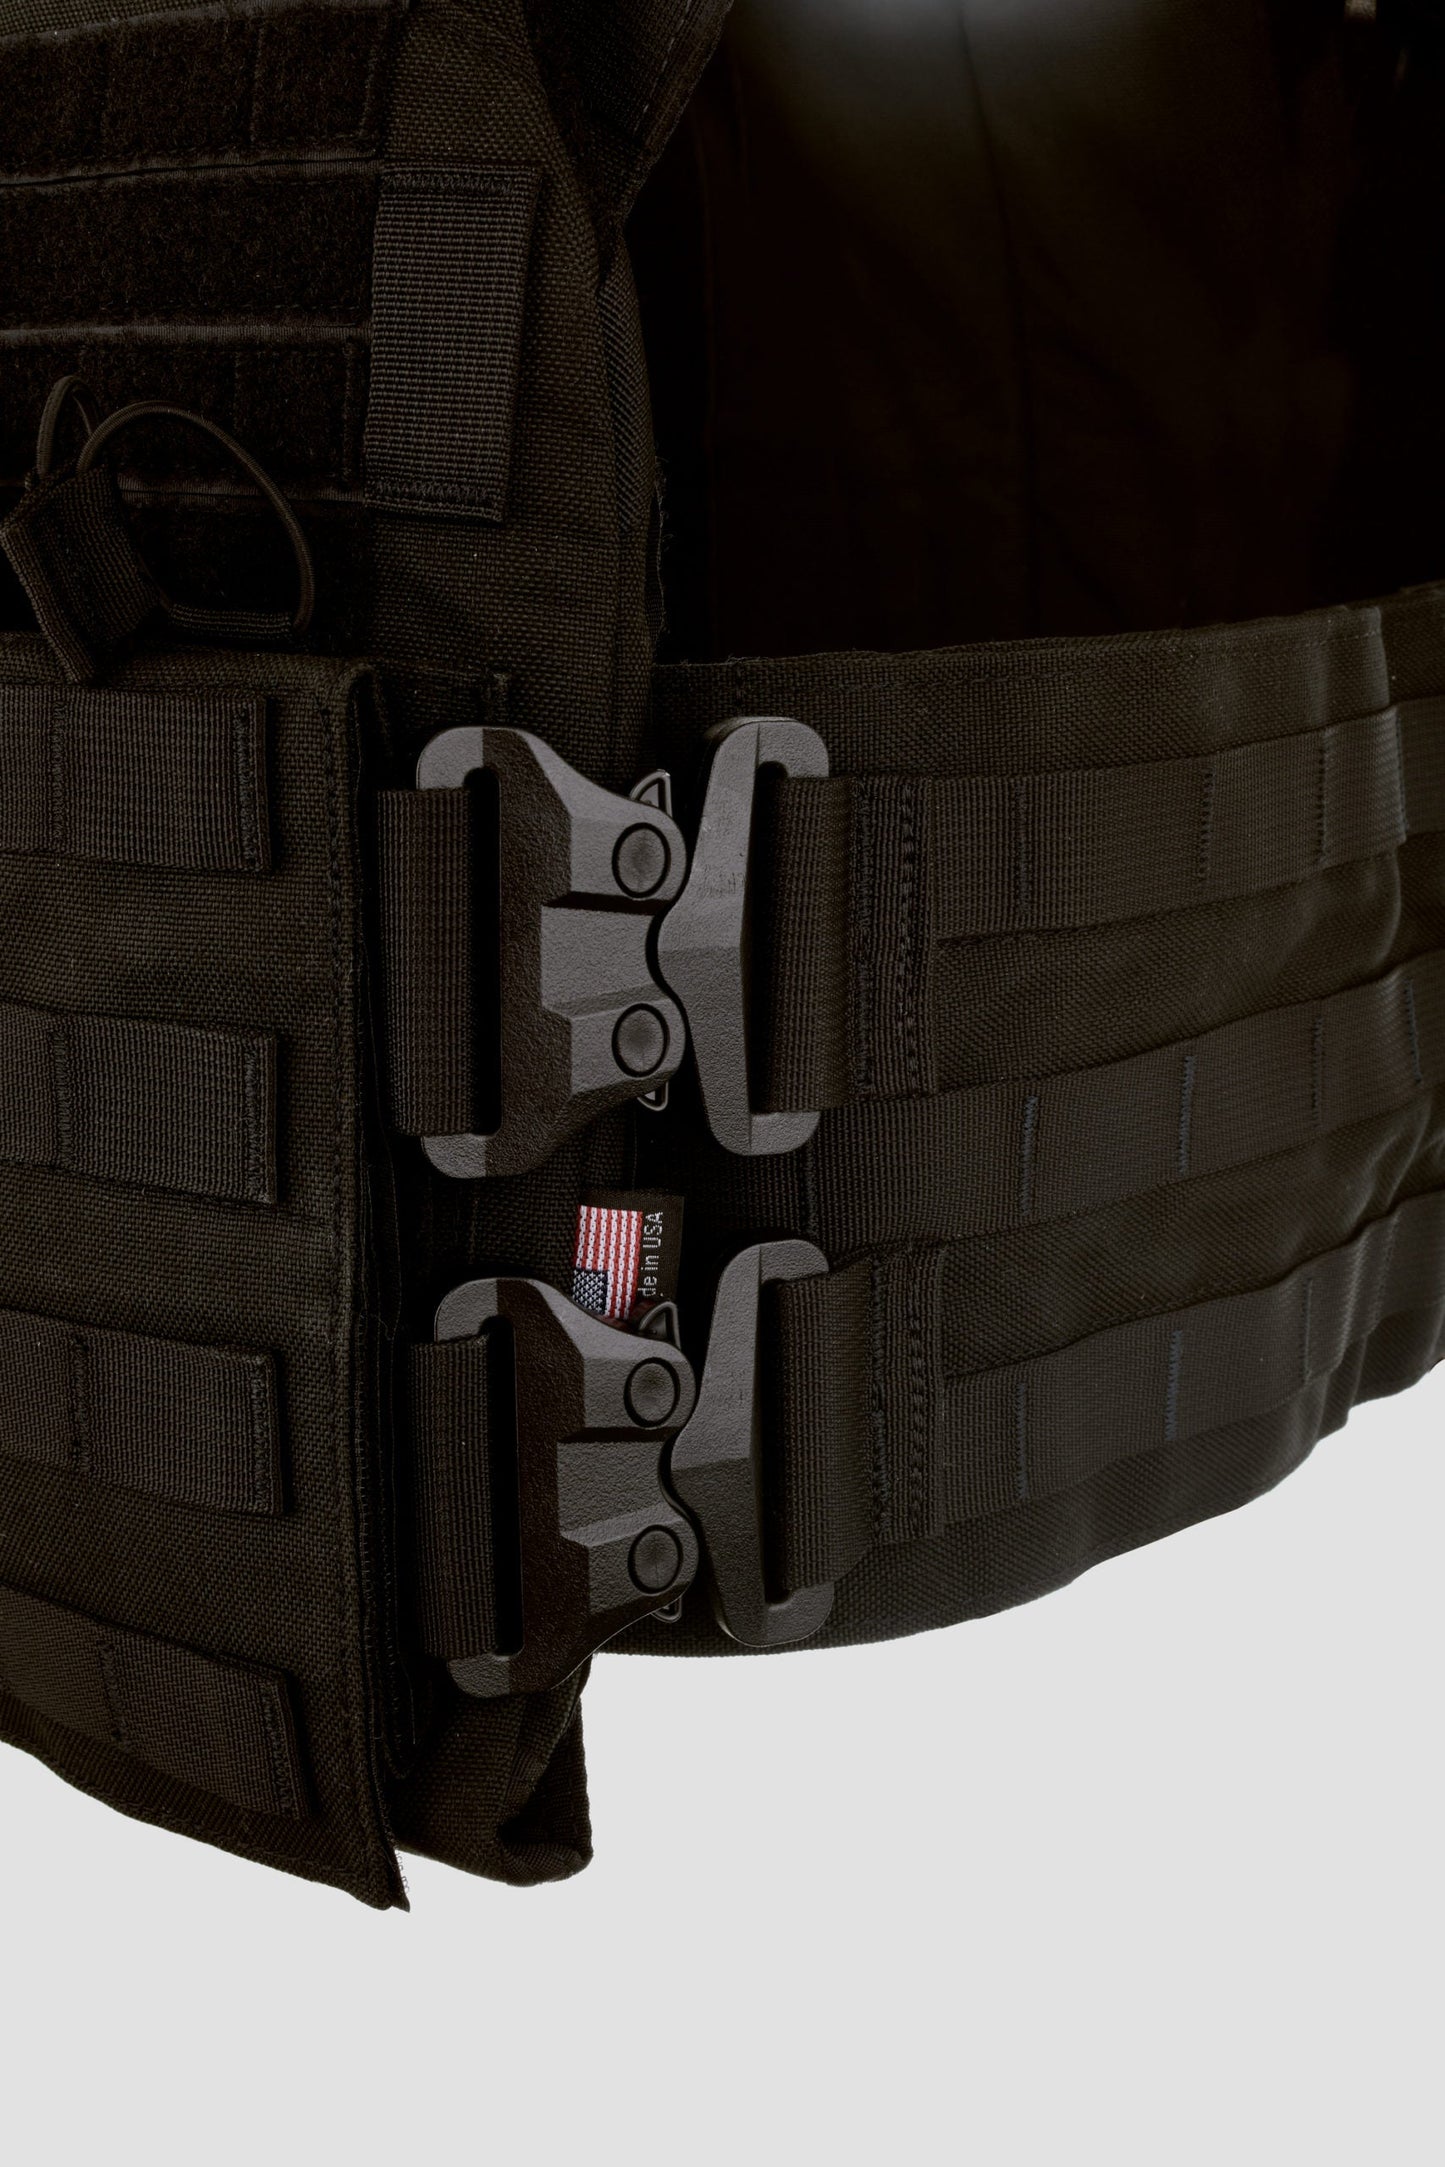 What is the MOLLE System? • Chase Tactical